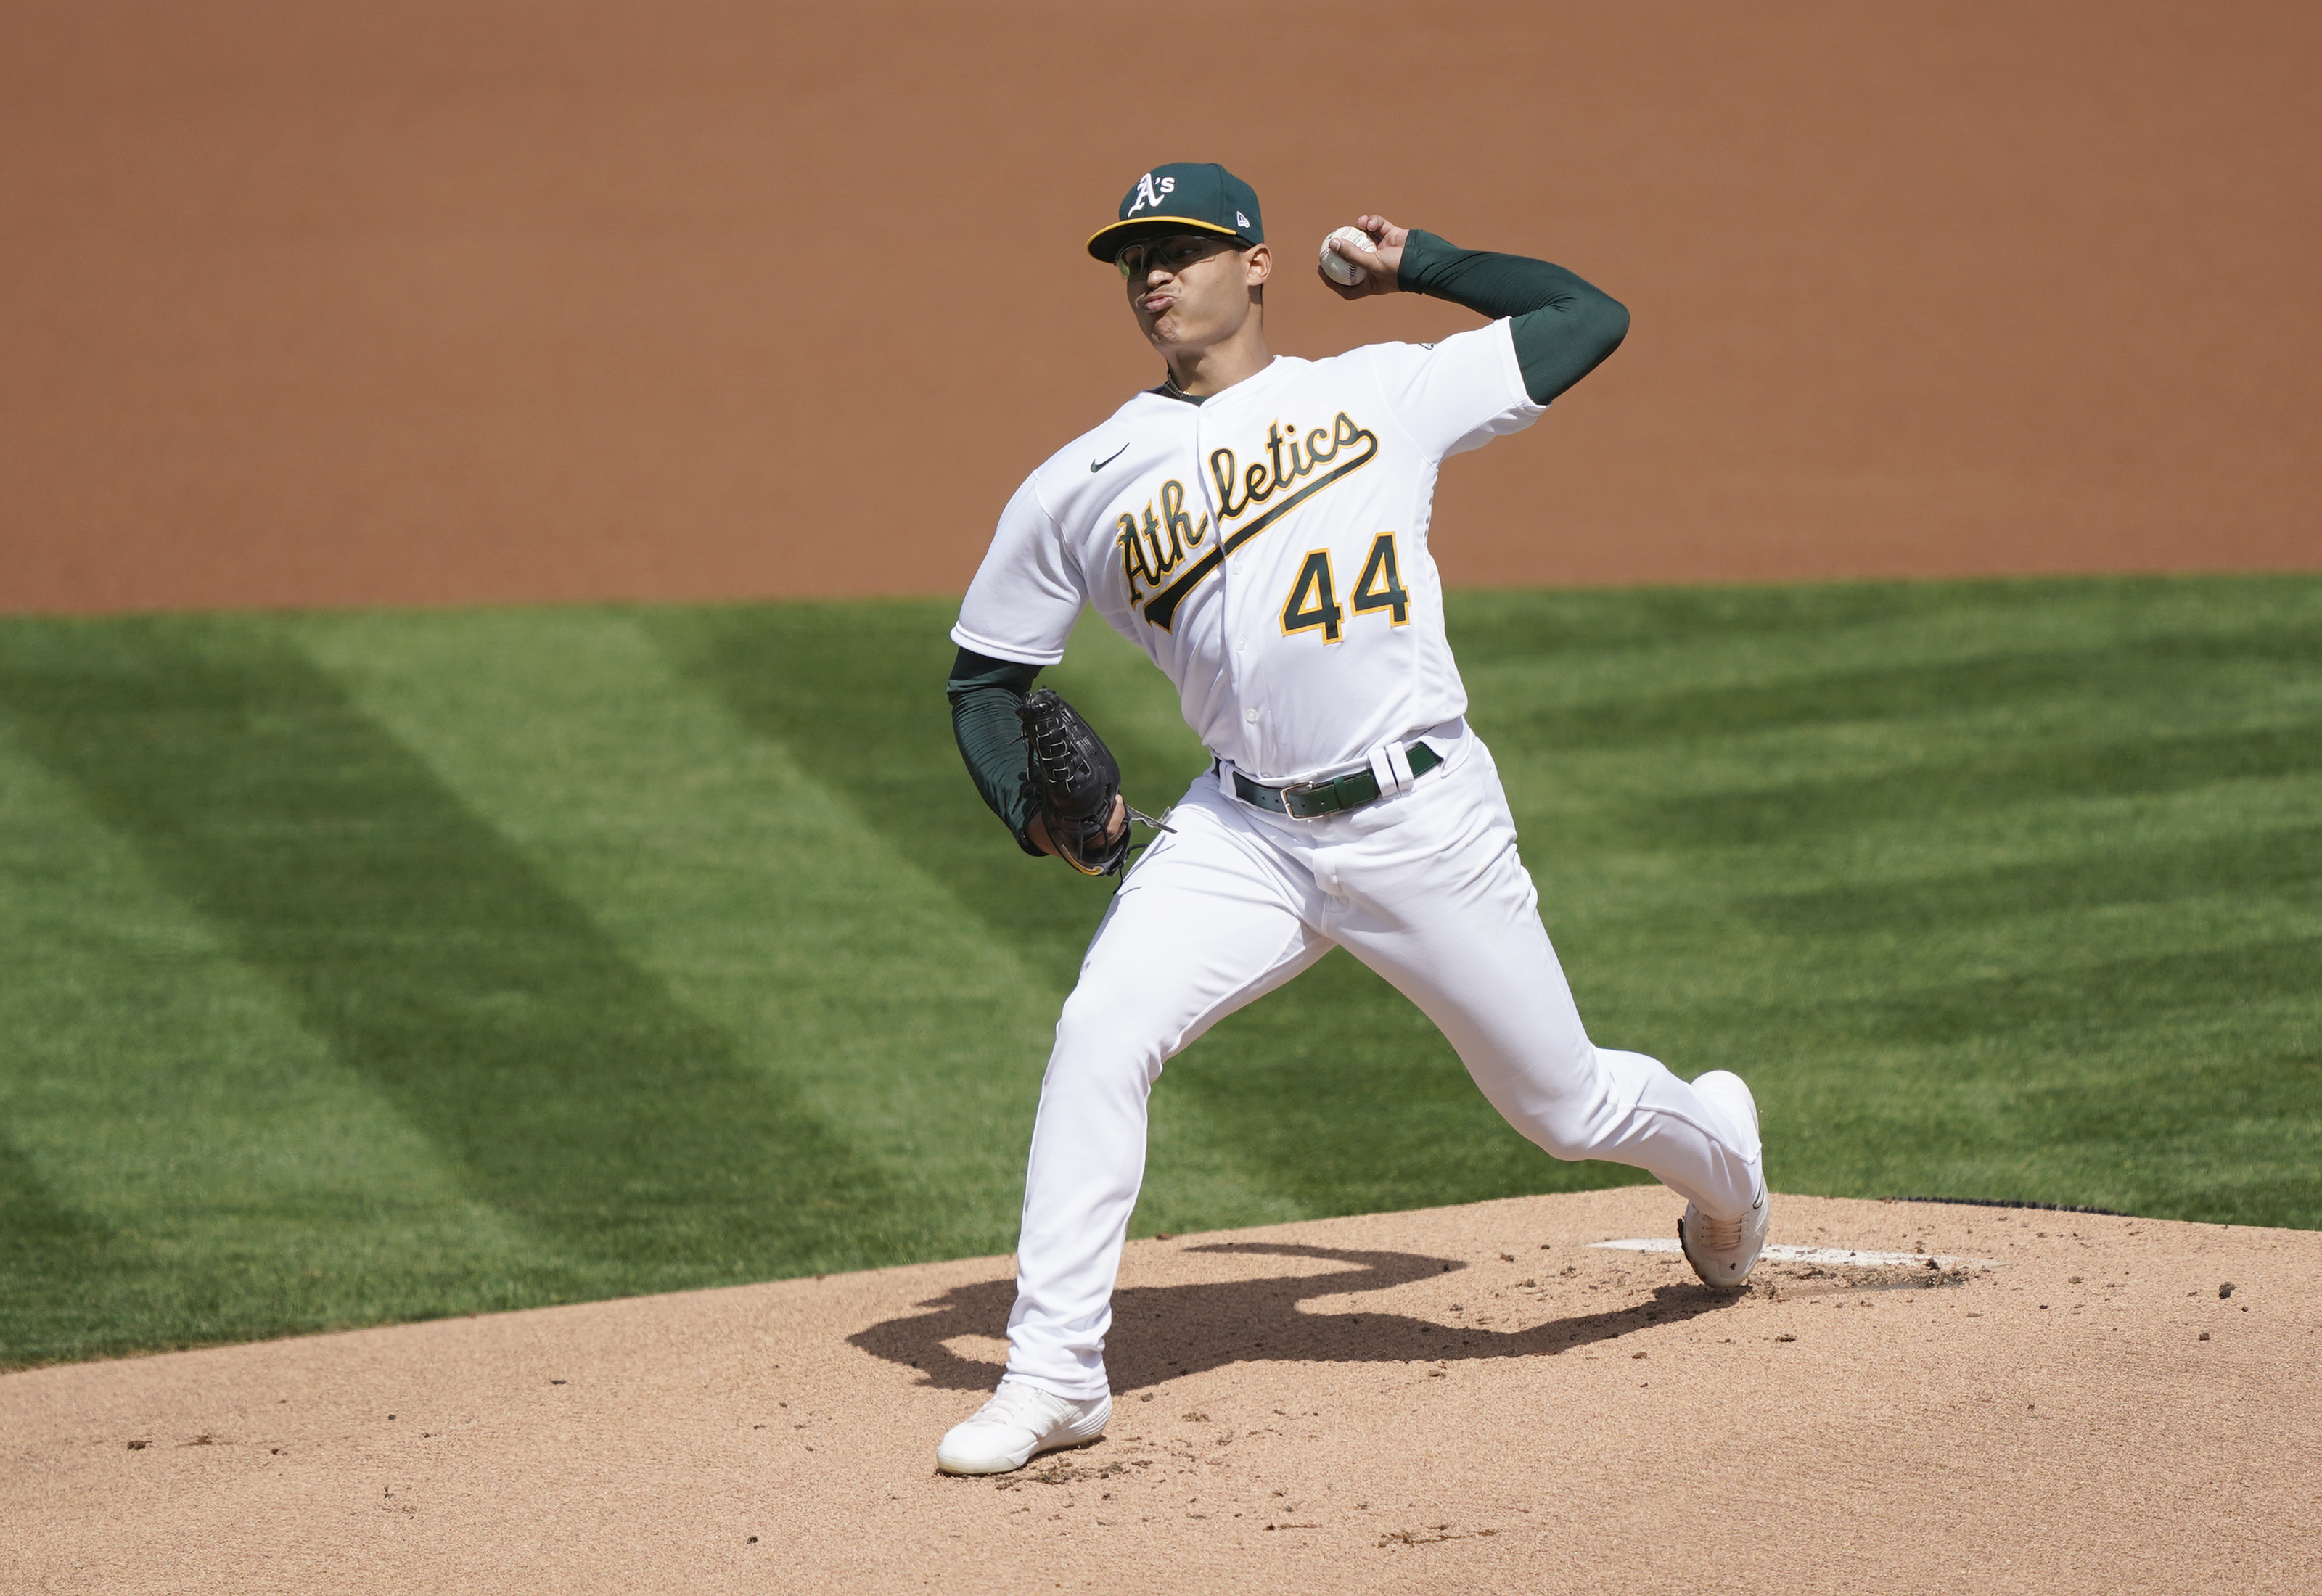 Athletics' Jesus Luzardo dominant out of bullpen, so may stay there